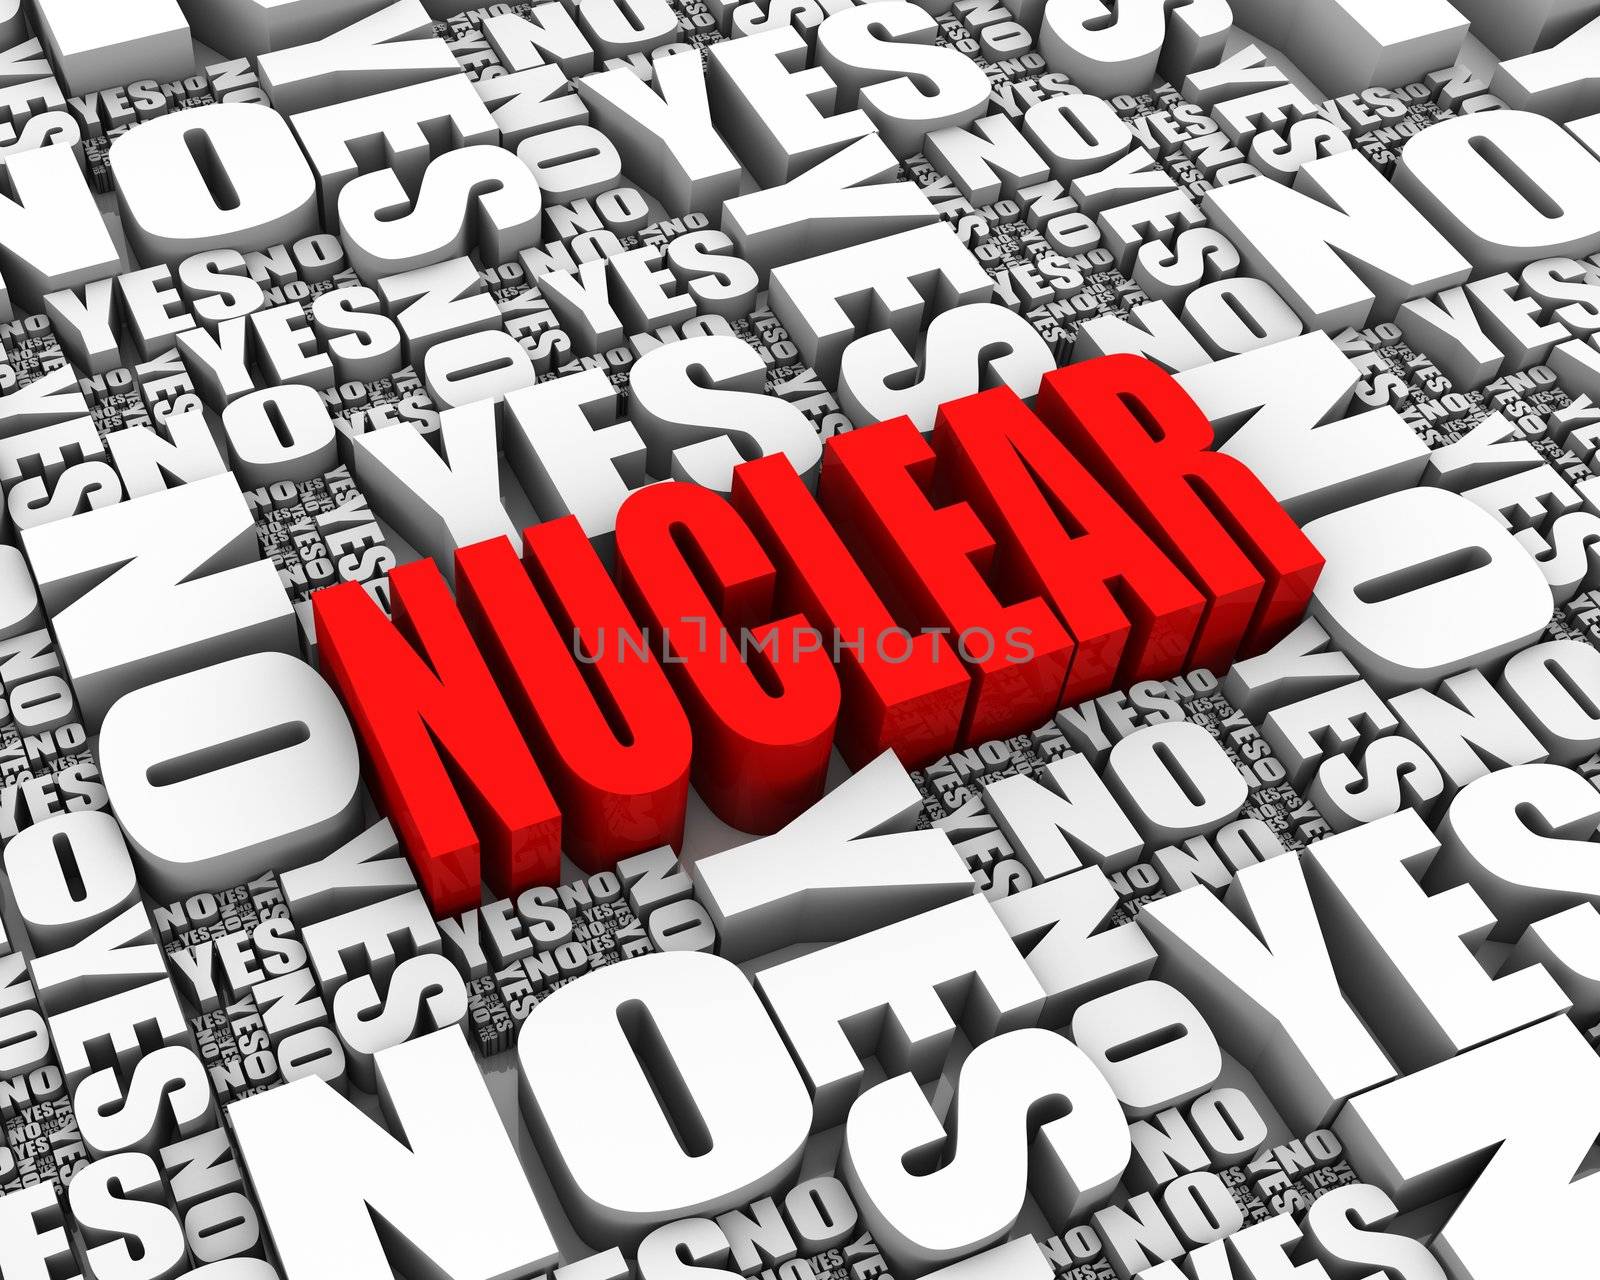 "NUCLEAR" 3D text surrounded by YES and NO words. Part of a series.